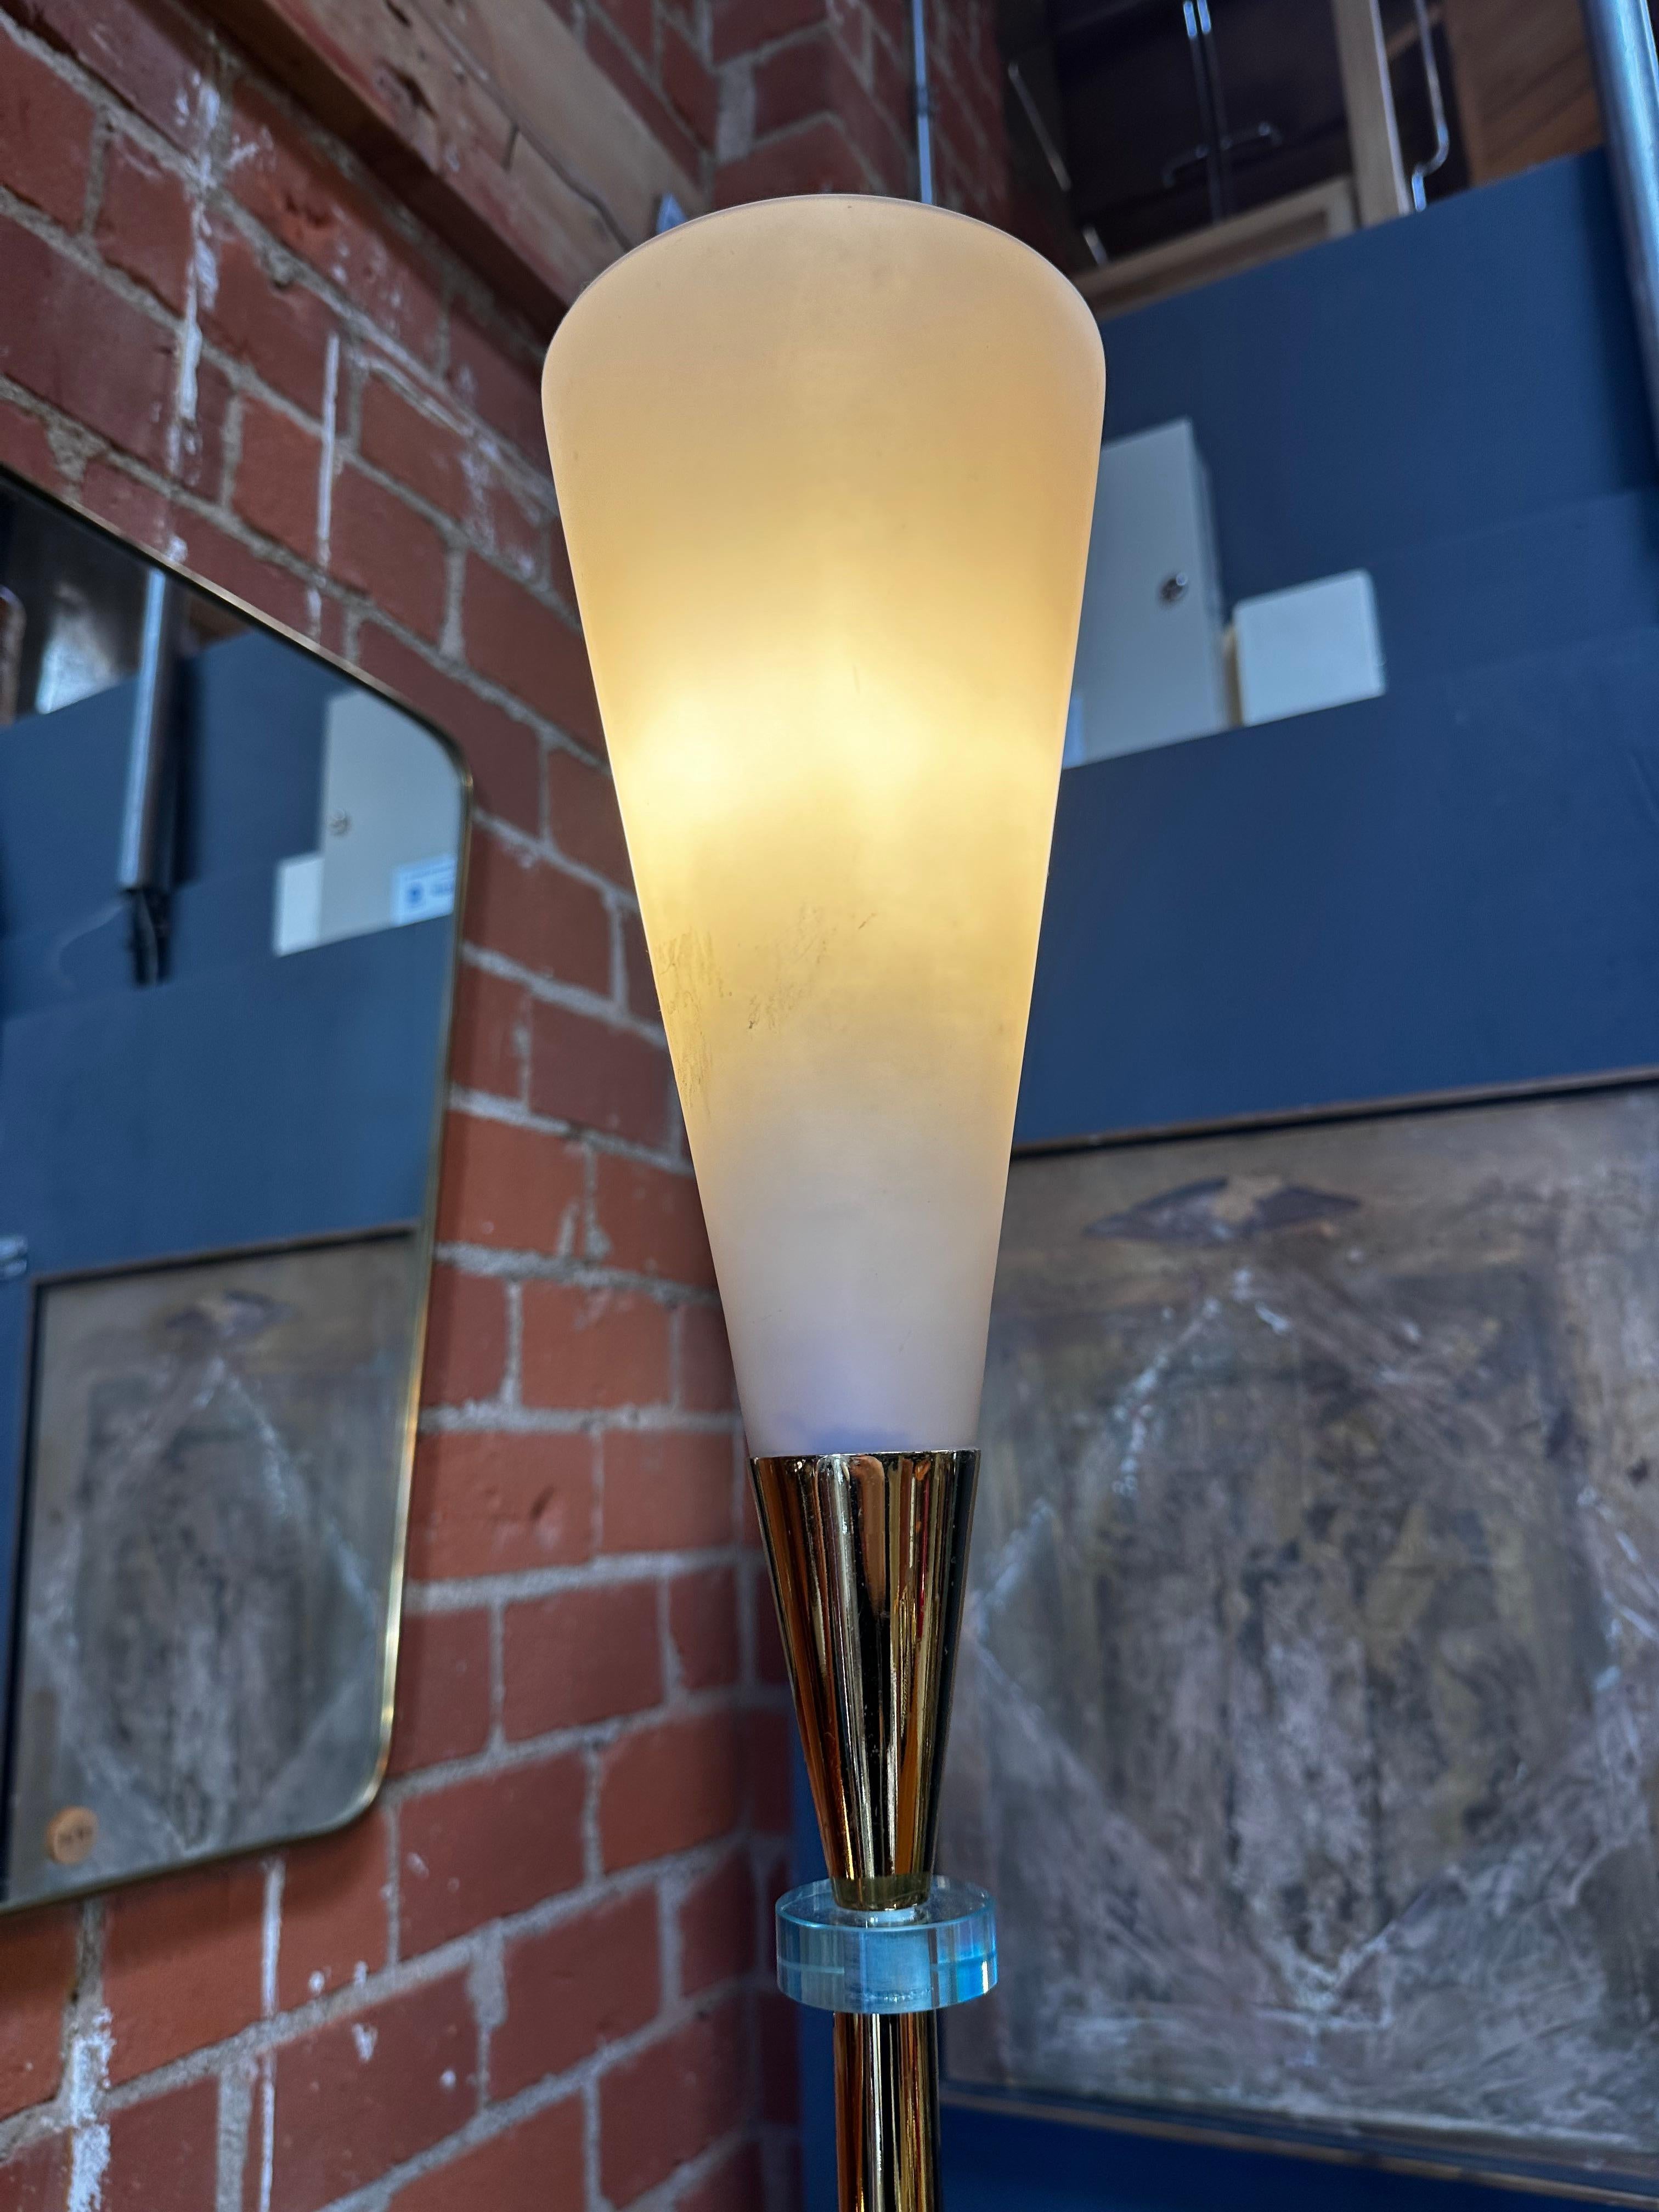 The Mid Century Italian Brass and Glass Floor Lamp from the 1960s is a sleek and sophisticated lighting fixture. Featuring a harmonious combination of brass and glass, this lamp exemplifies the elegant design trends of mid-century Italy. Its